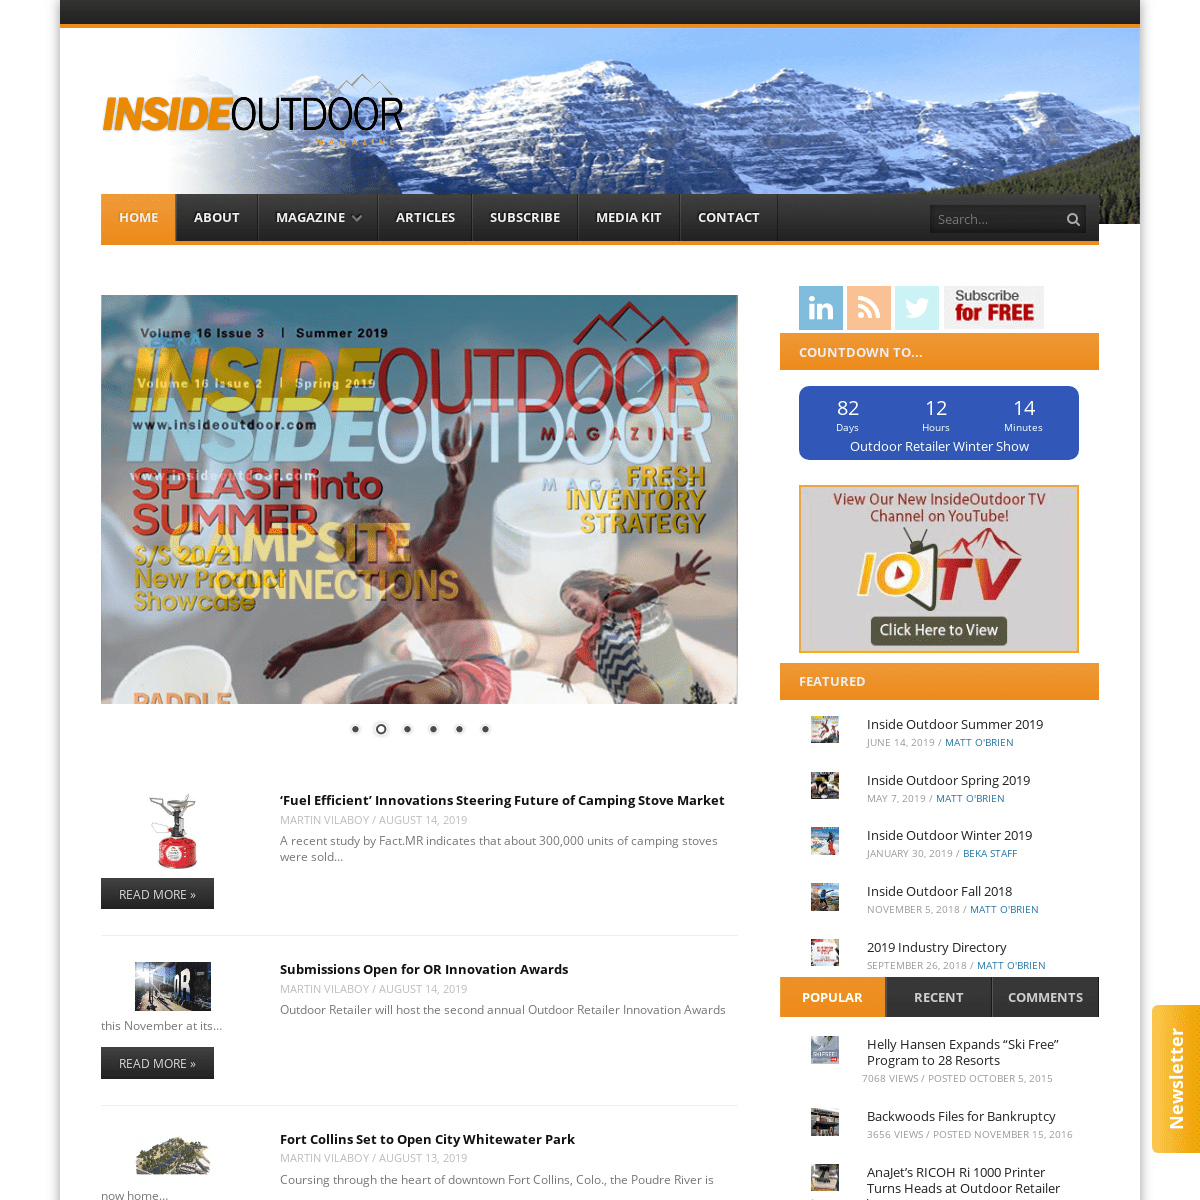 Inside Outdoor Magazine - Business Intelligence for the Outdoor Lifestyle